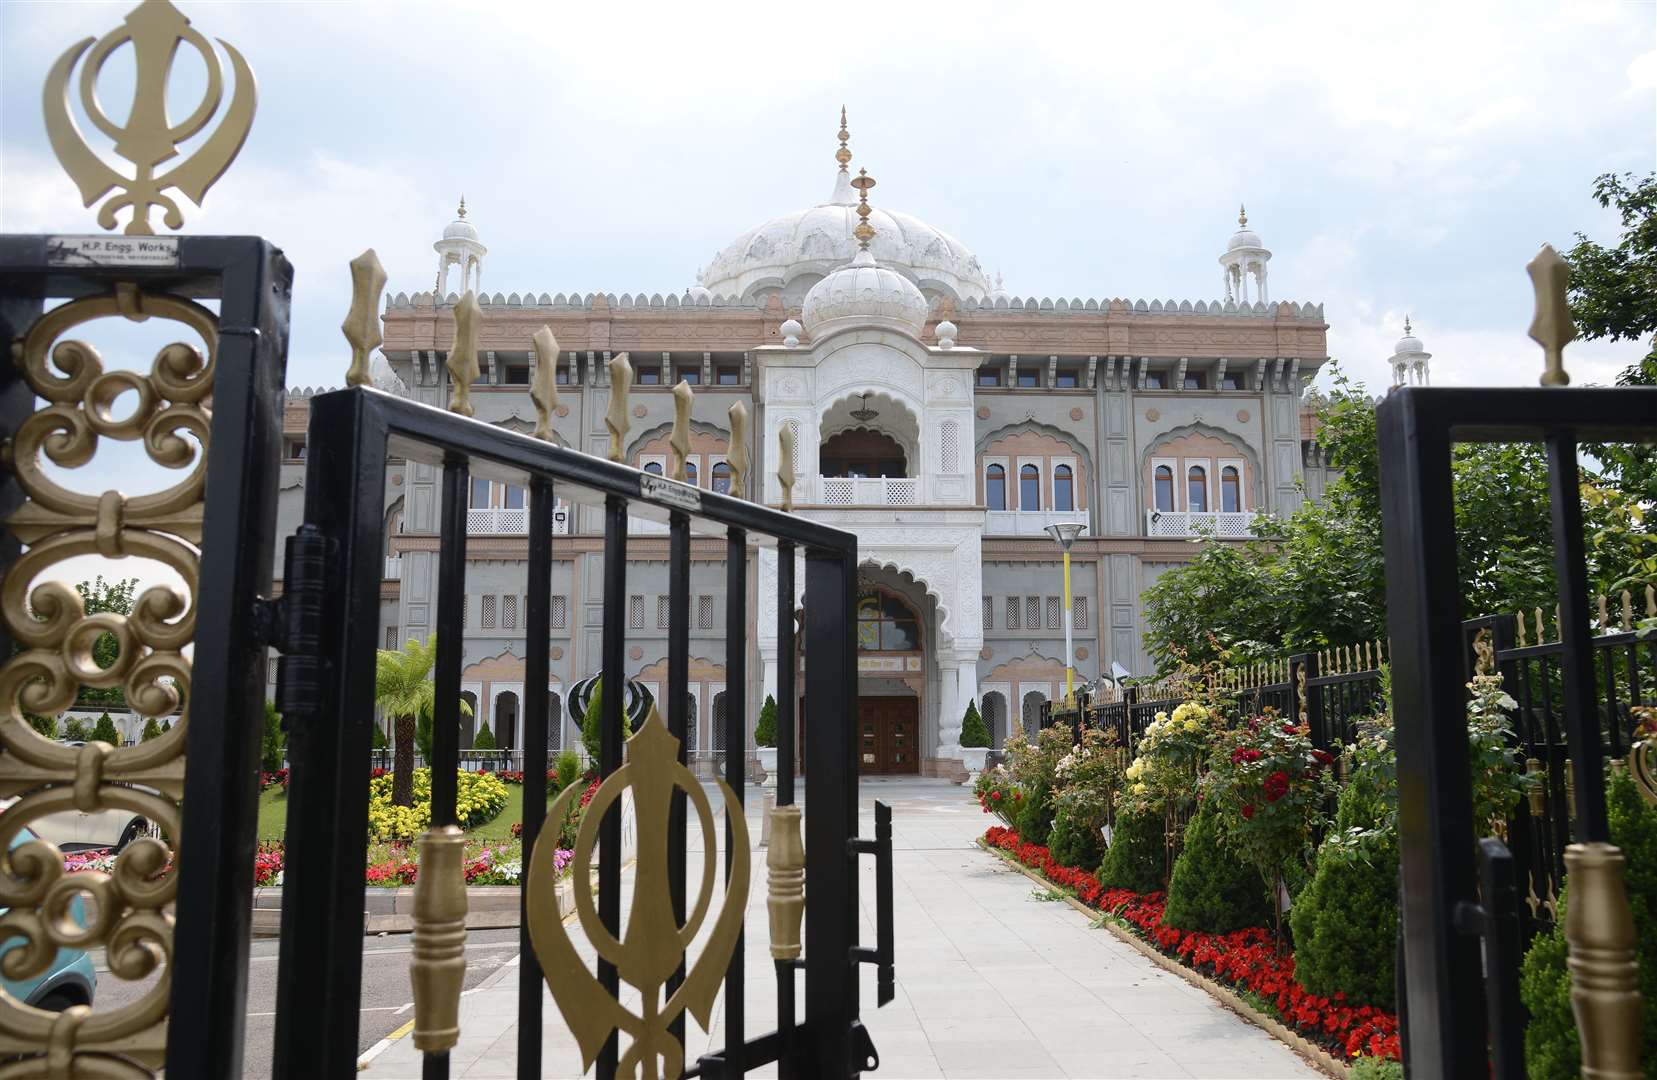 The spectacular Gravesend Gurdwara is one of the largest Sikh temples outside of India